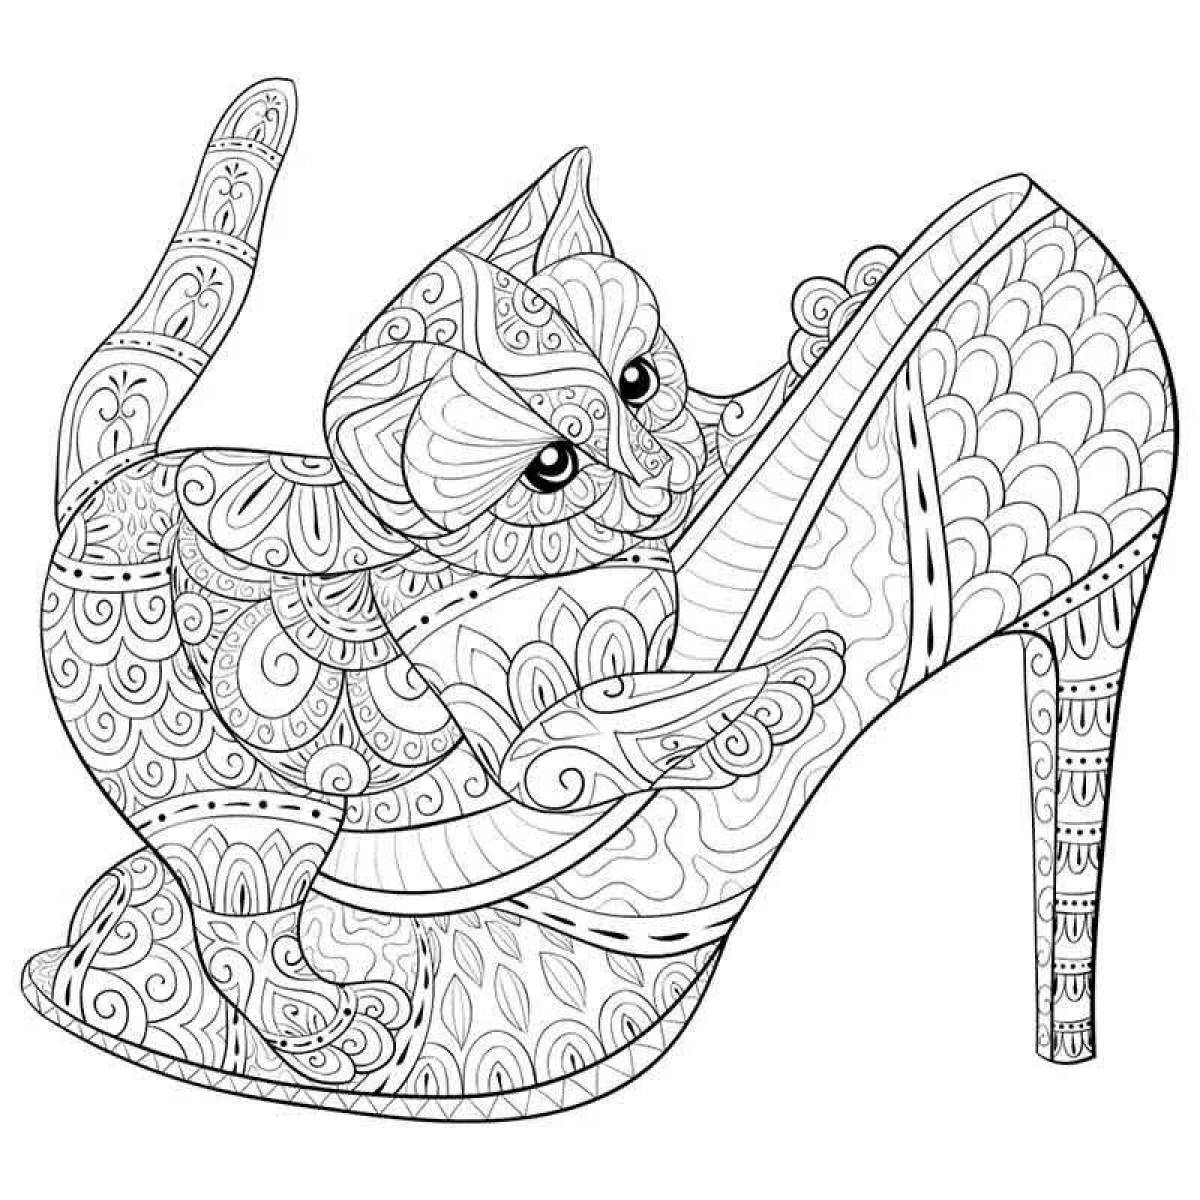 Charming coloring book for girls 12 years old - cats